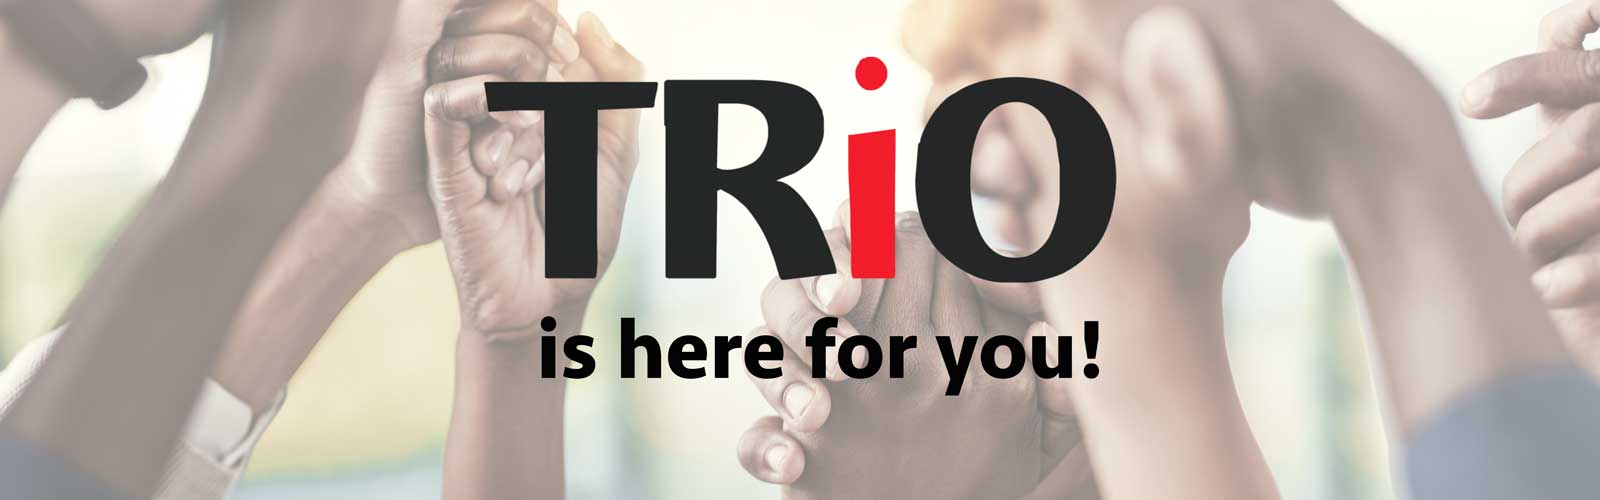 TRiO is here for you!